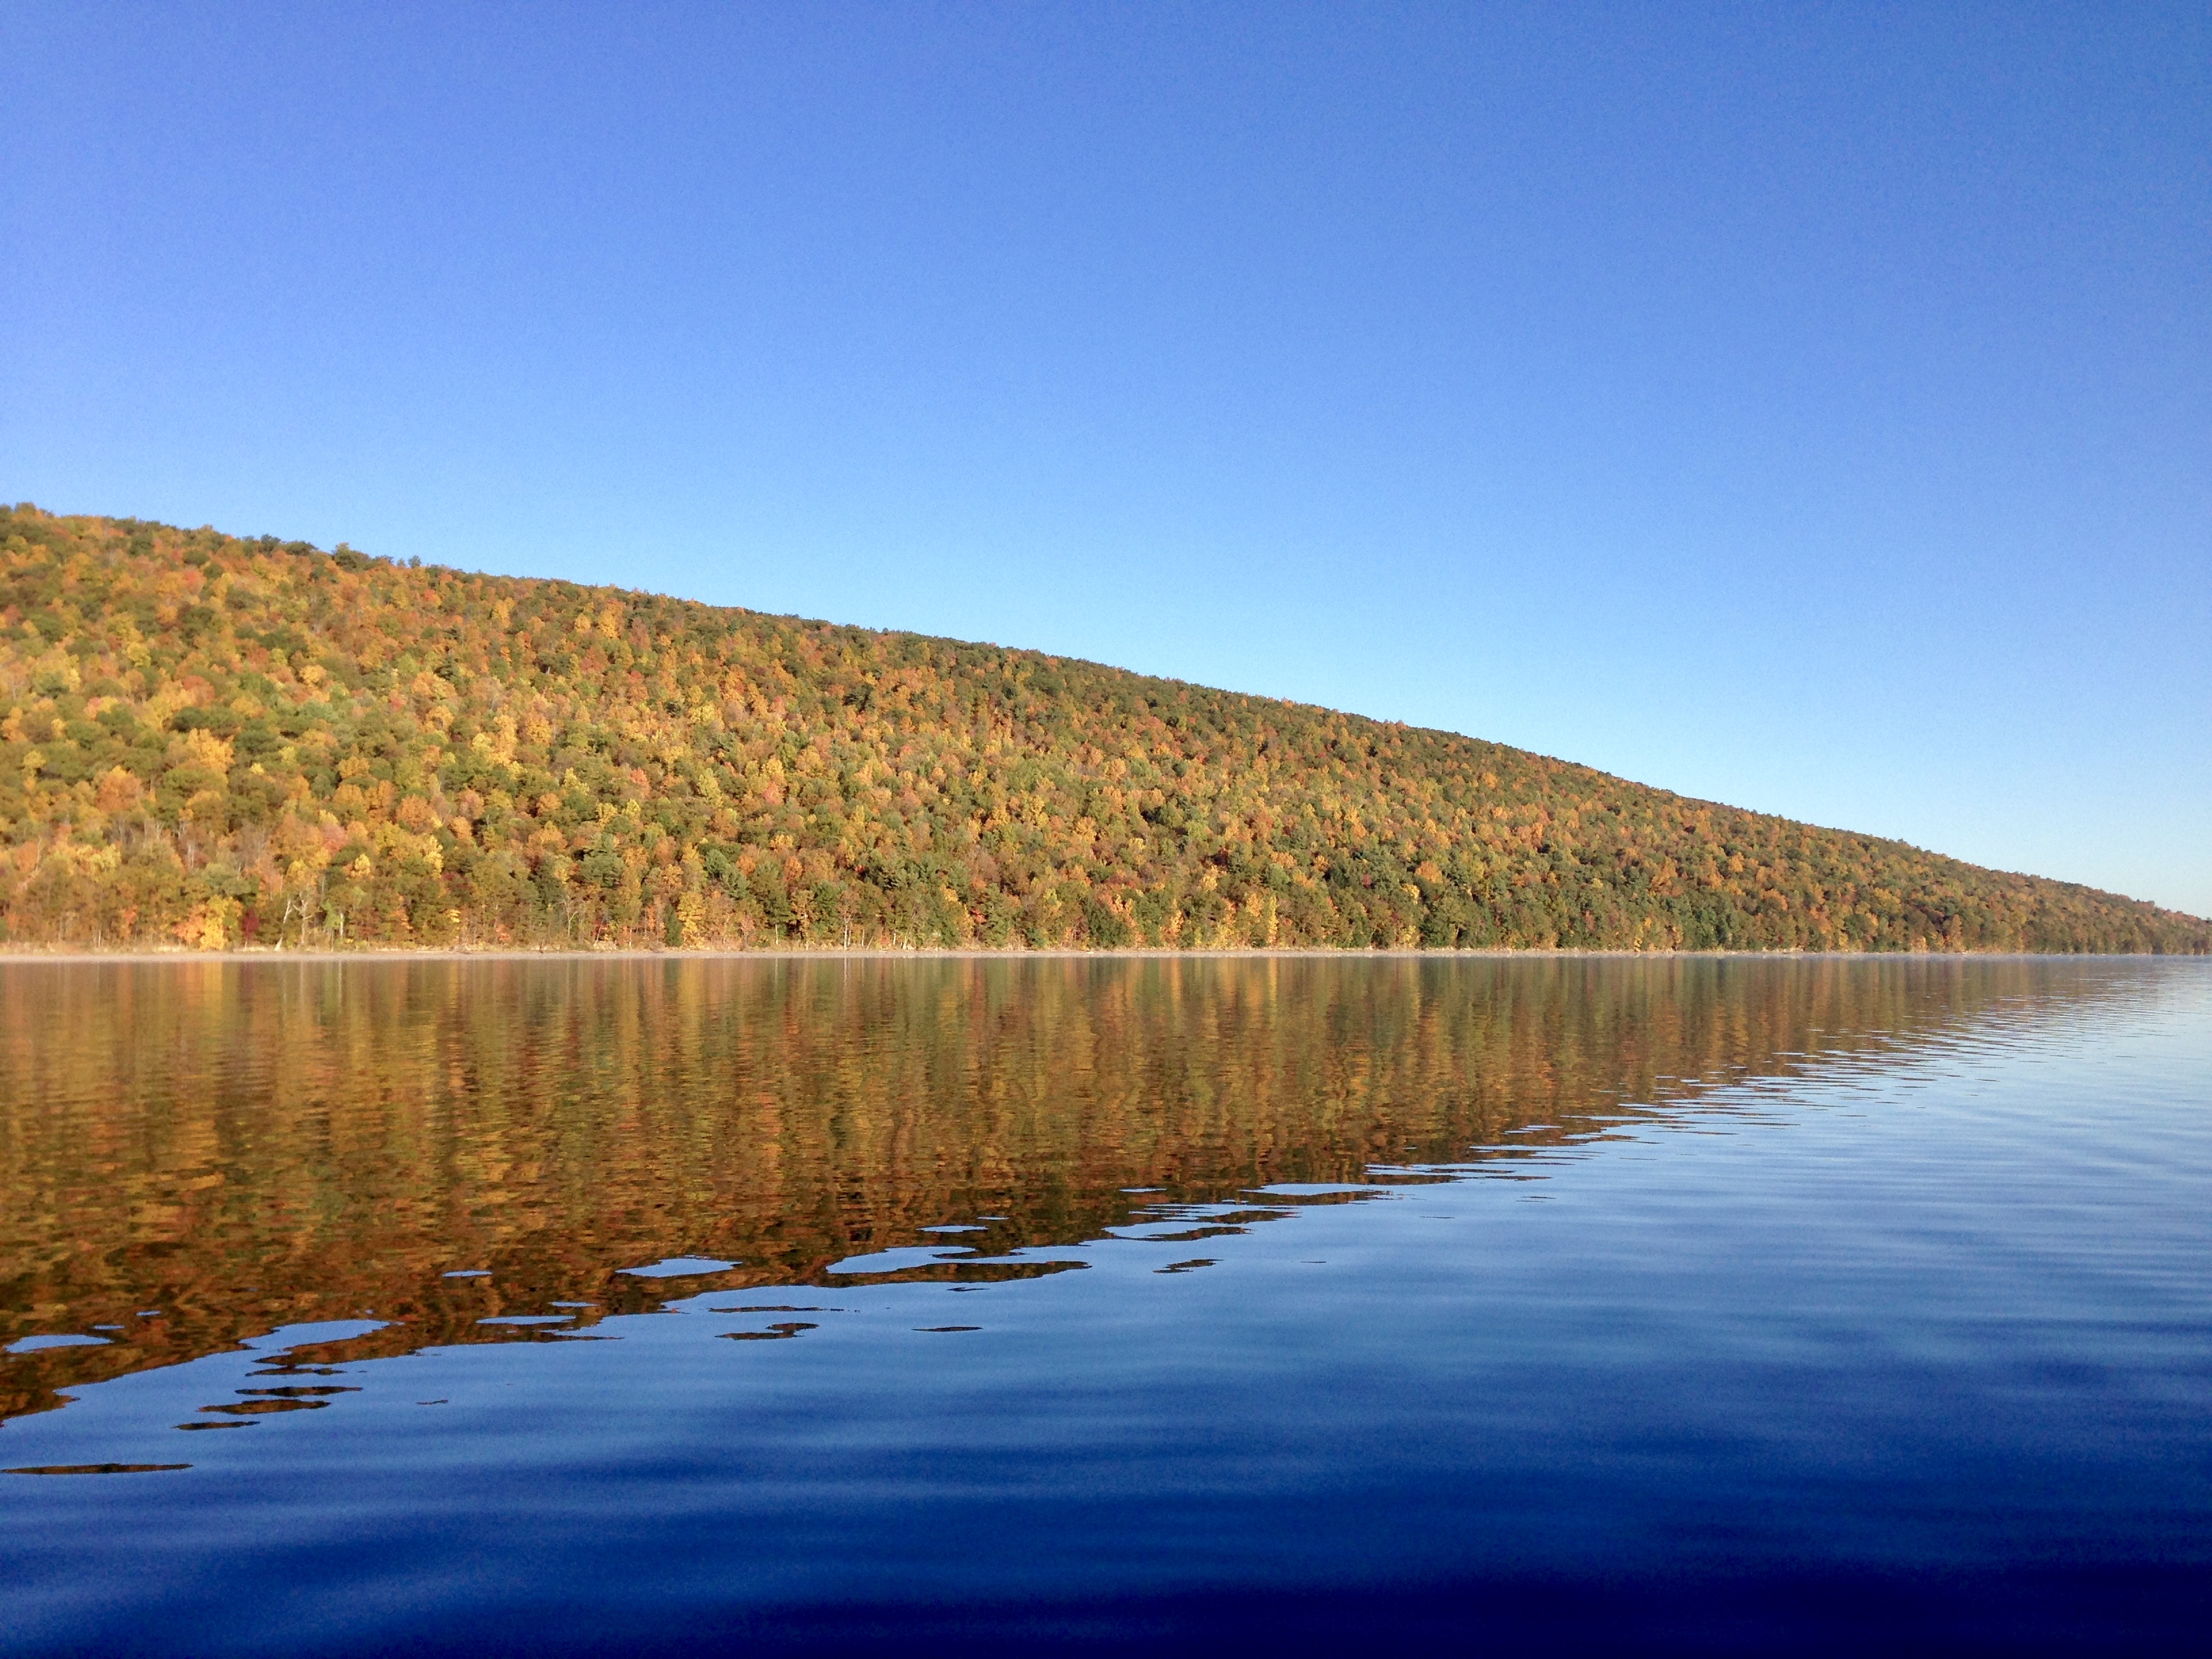 Fall foliage over a lake in the Finger Lakes region of New York State.